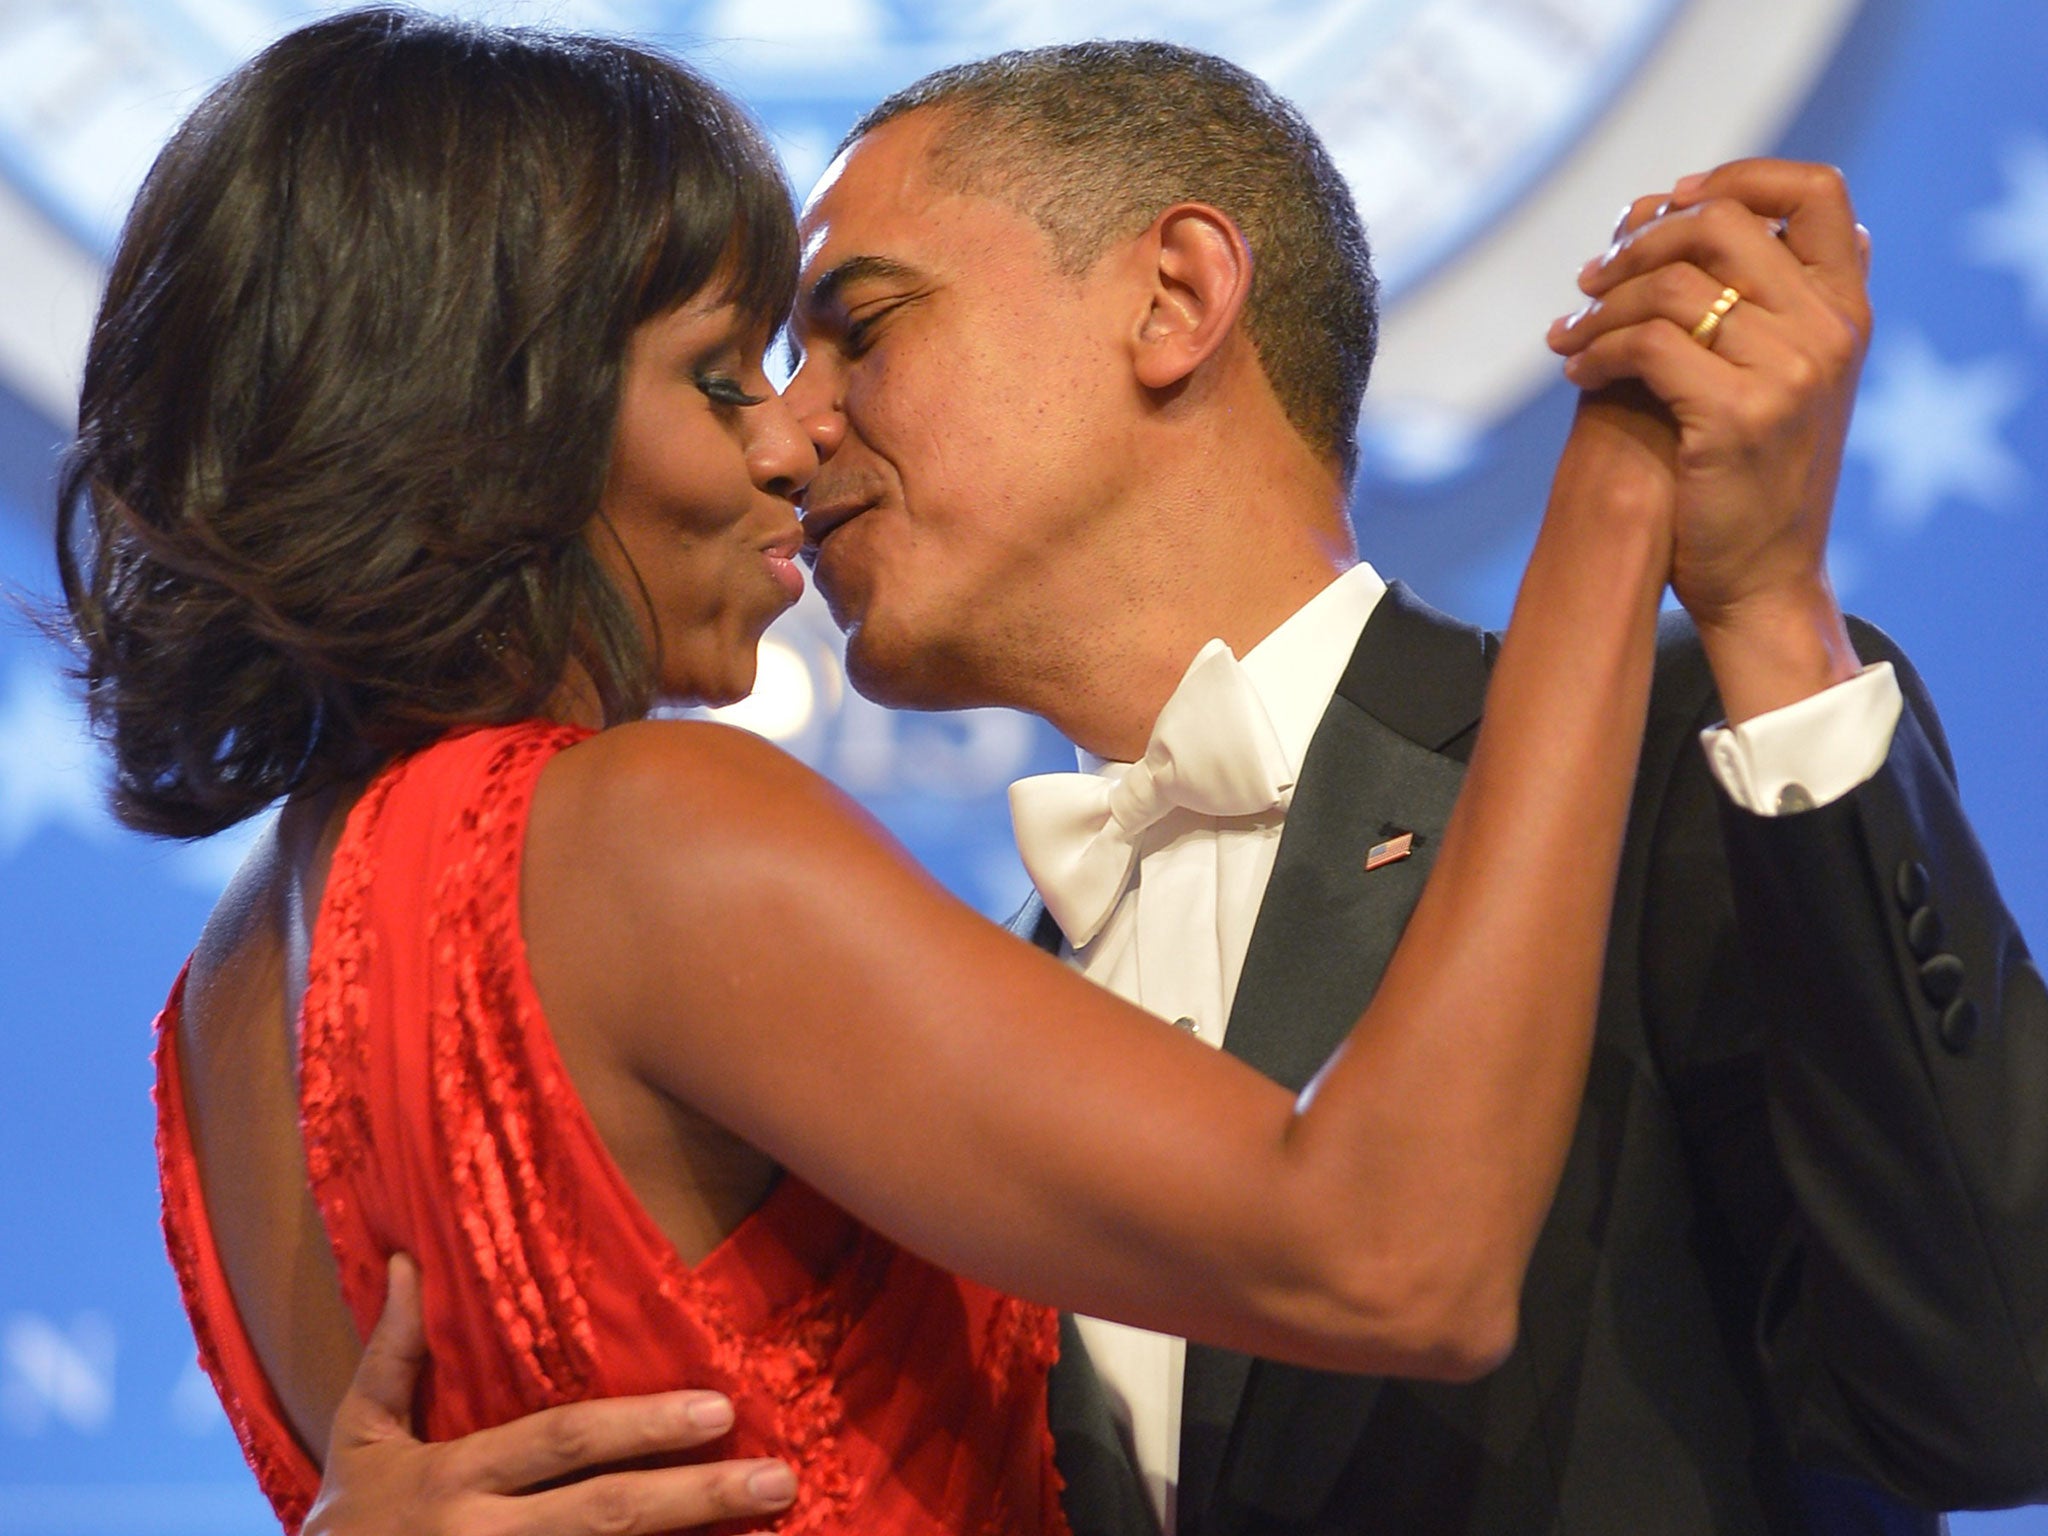 Barack Obama reveals he and friends danced the night away in a White House office